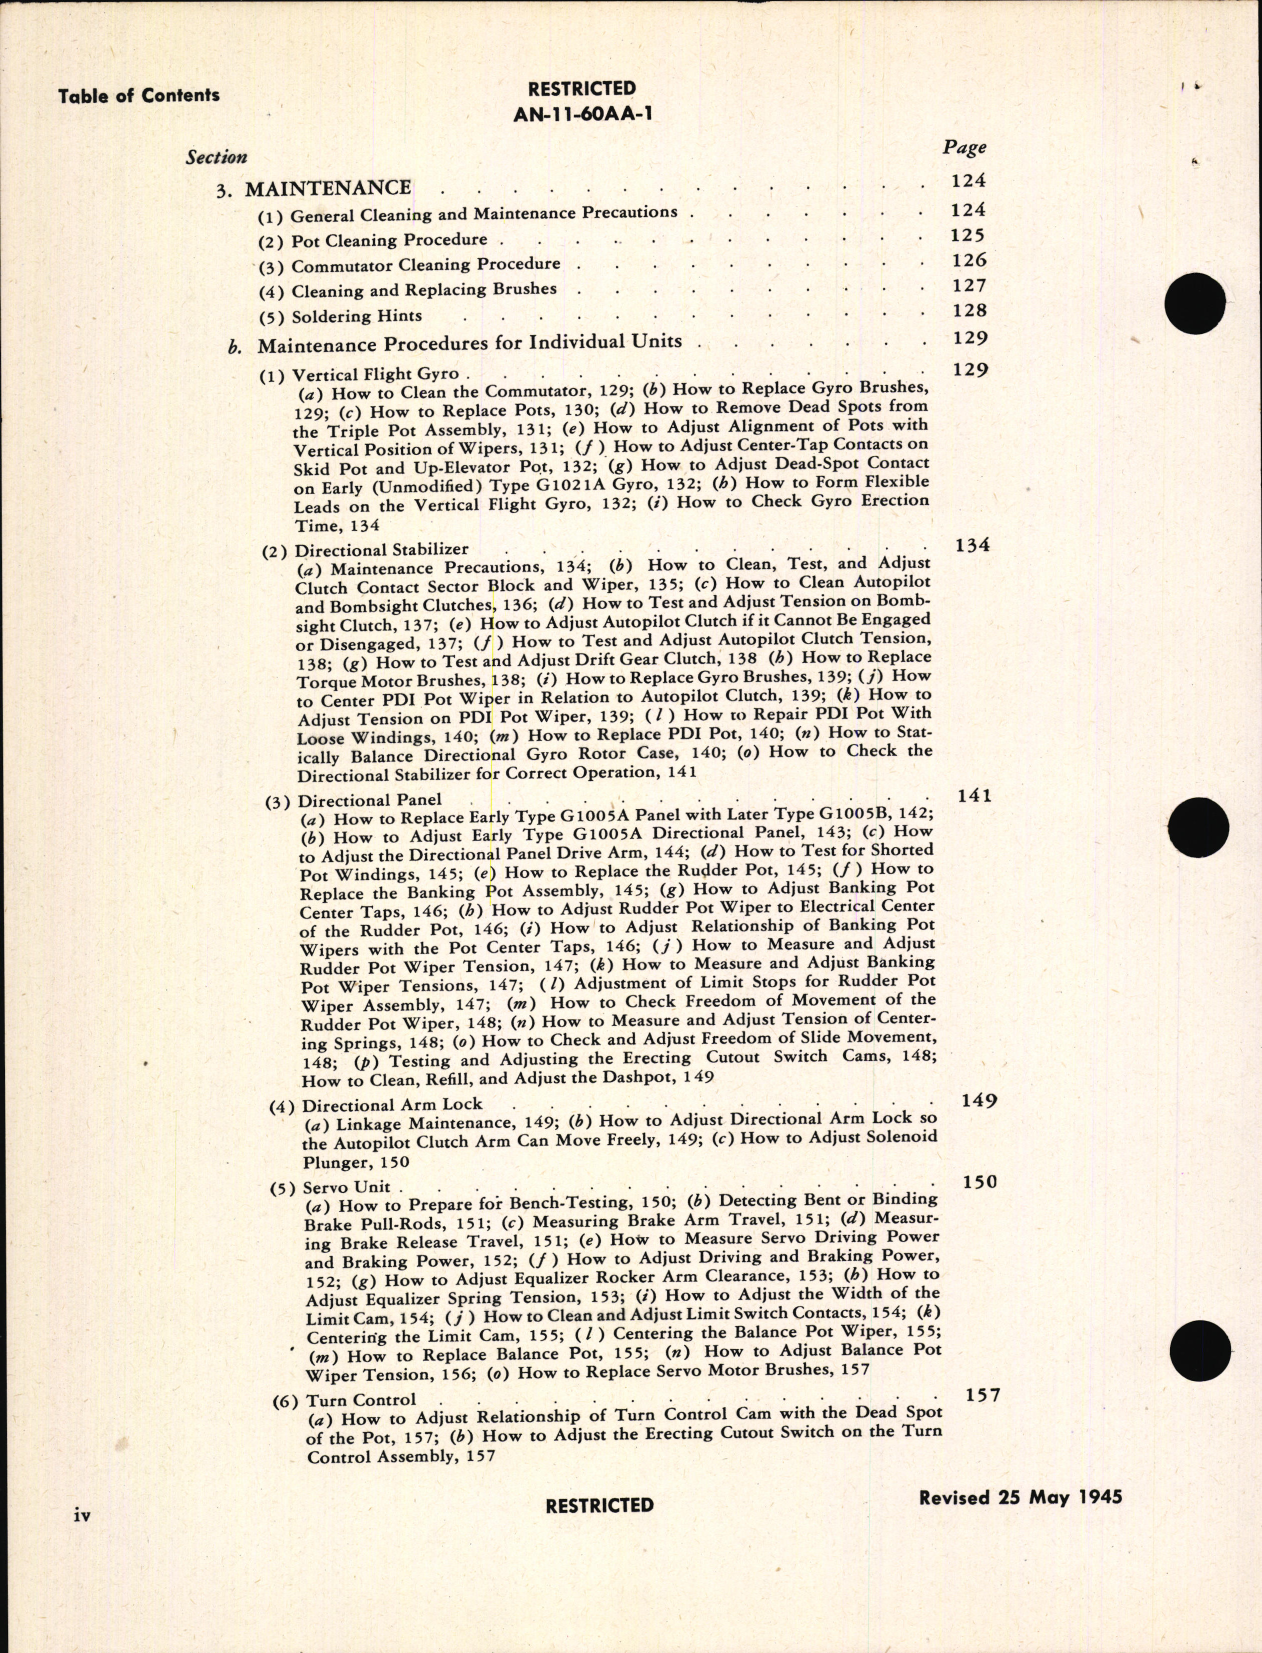 Sample page 6 from AirCorps Library document: Operation and Service Instructions for Automatic Pilot Type C-1